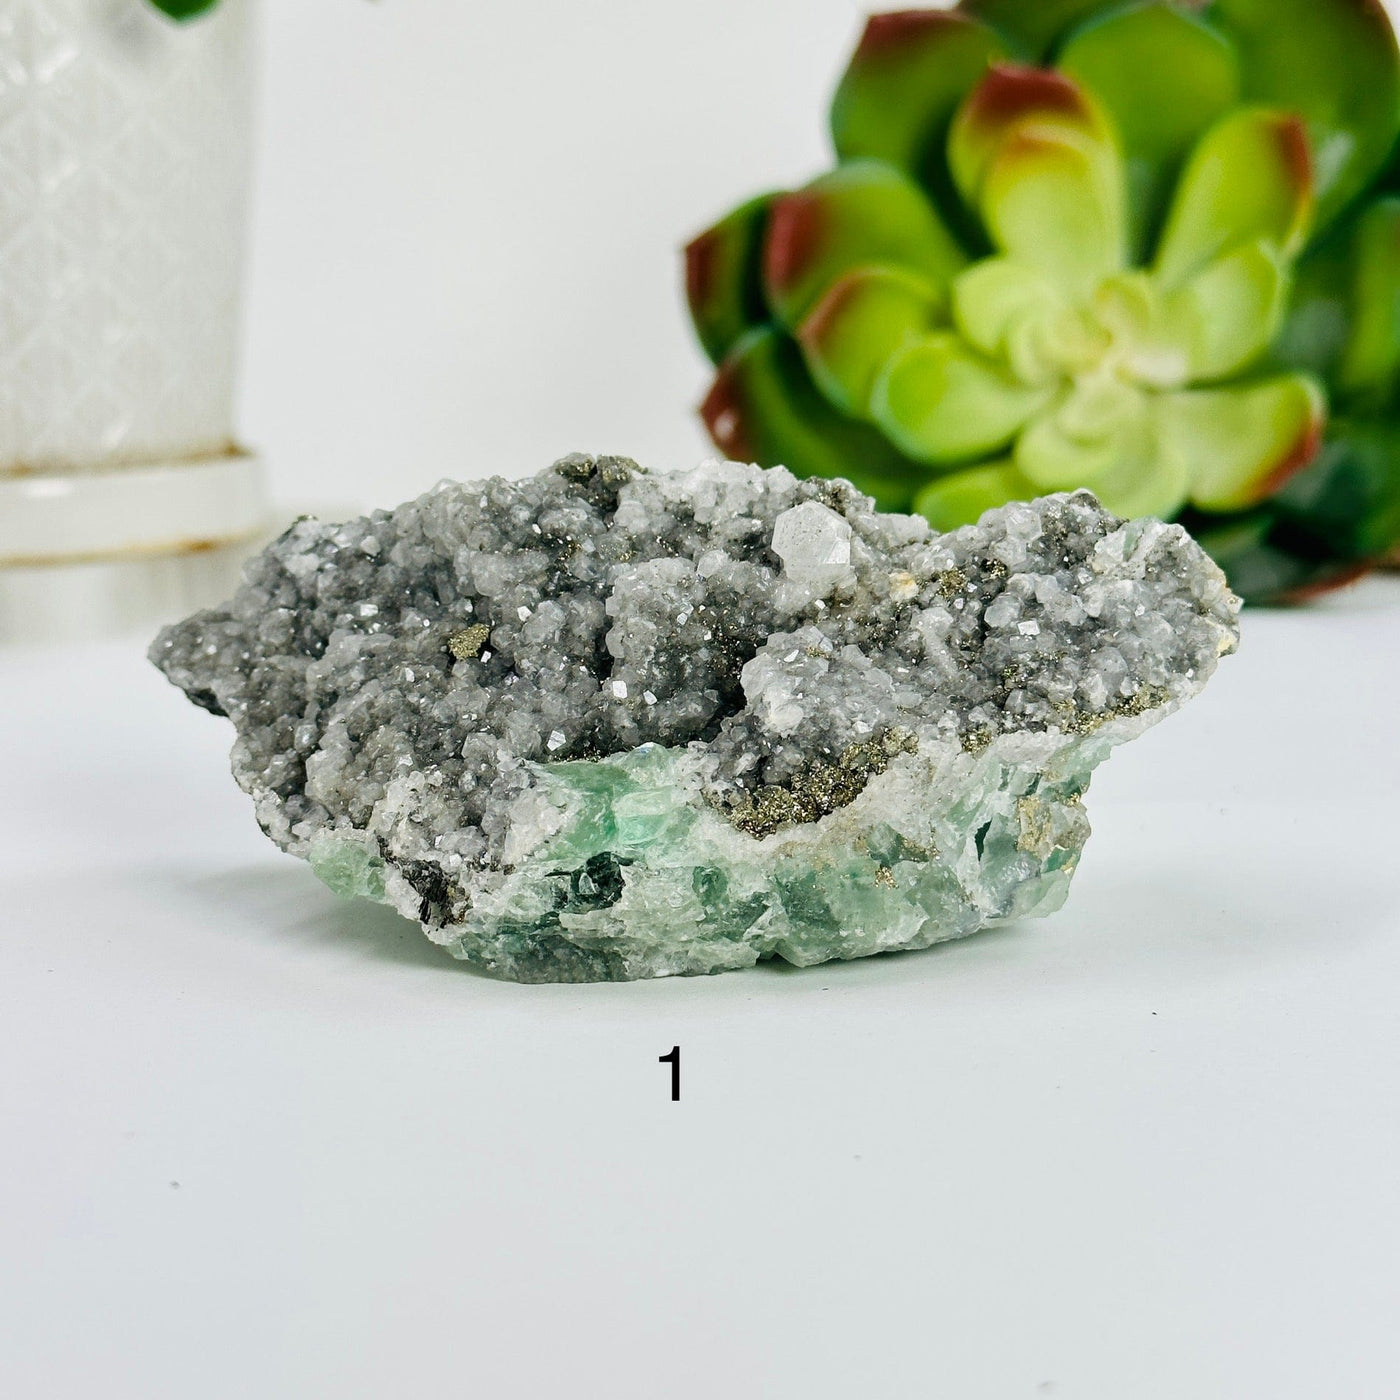 variant 1 of fluorite with pyrite and crystal quartz growth with decorations in the background